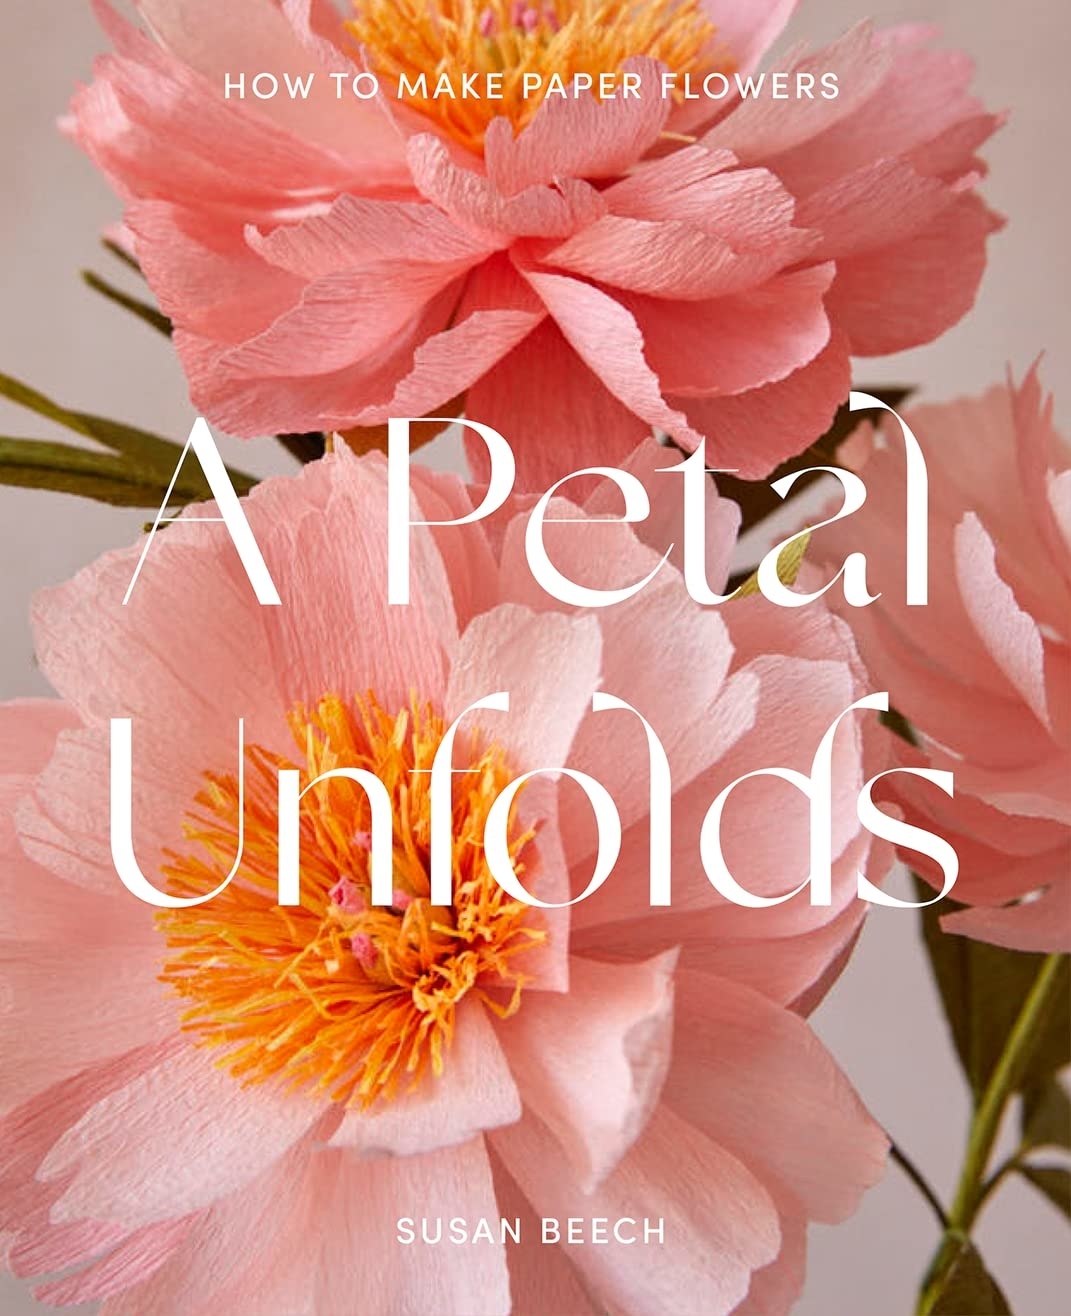 Book cover titled &quot;A Petal Unfolds&quot; by Susan Beech, displaying paper flowers and a guide on crafting them